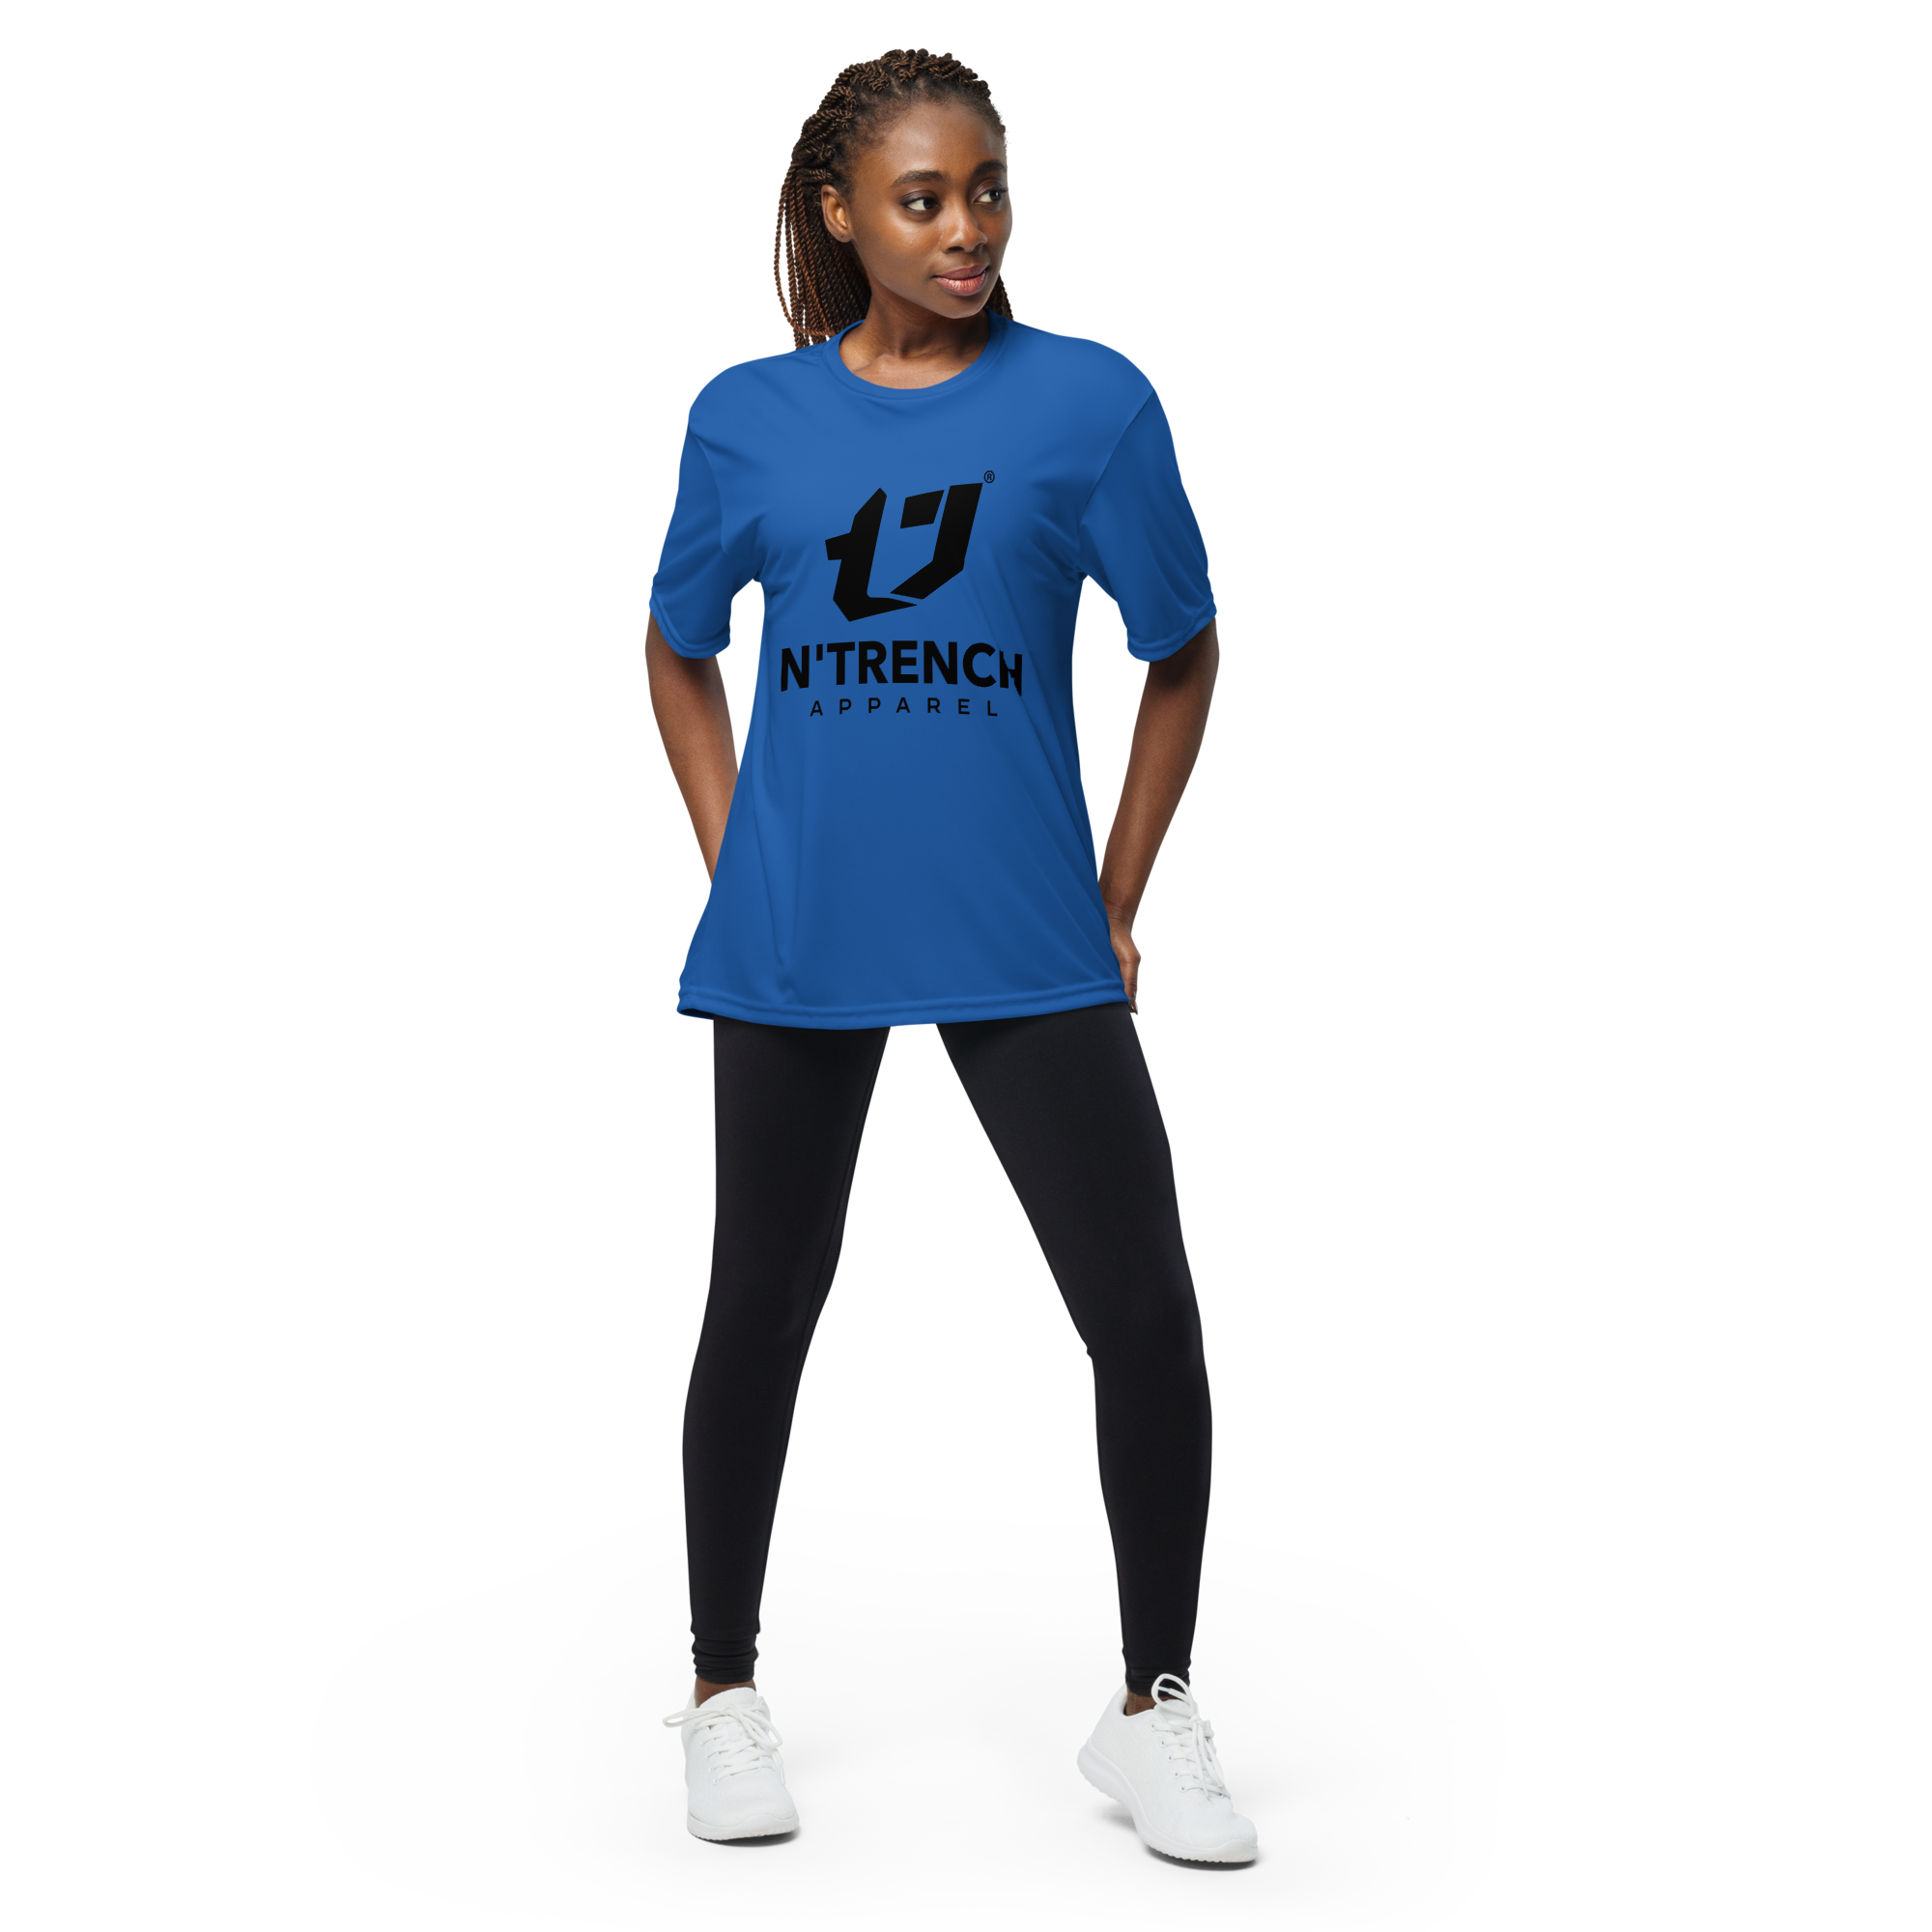 N'Trench Apparel Black Lettering unisex performance crew neck t-shirt 2